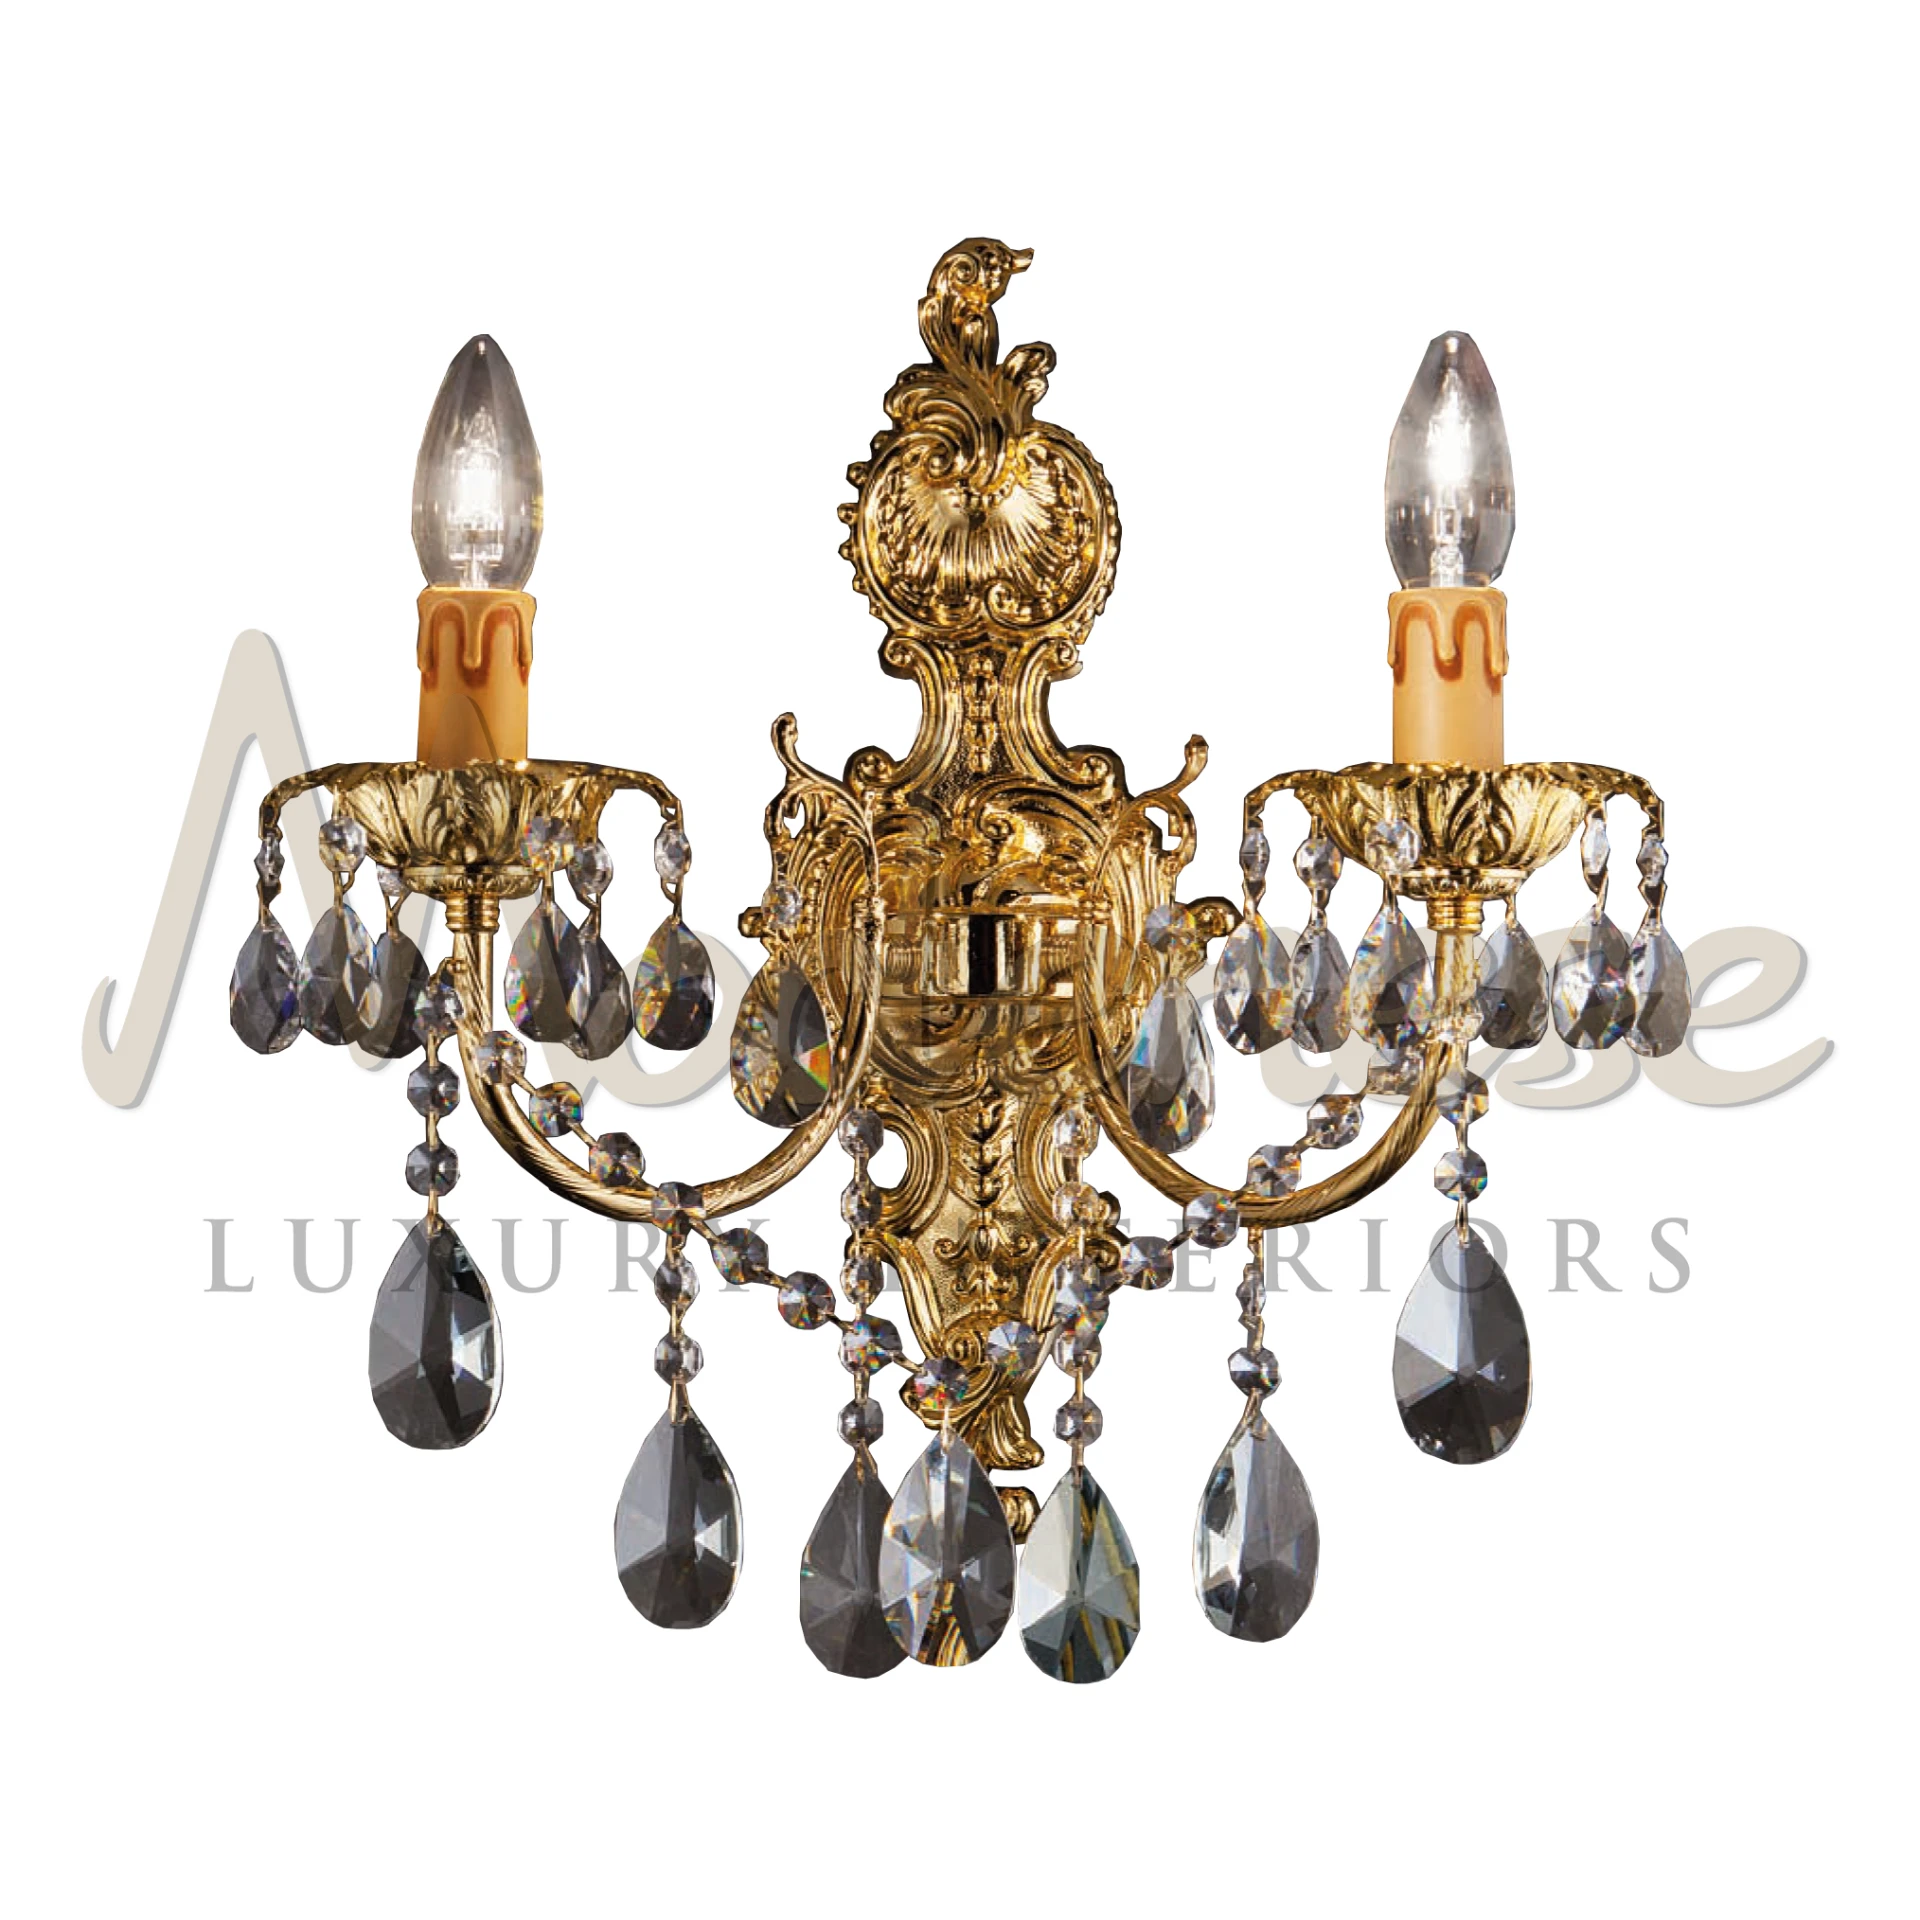 Luxurious Opulent Baroque Wall Luminaire with Gold & Crystals